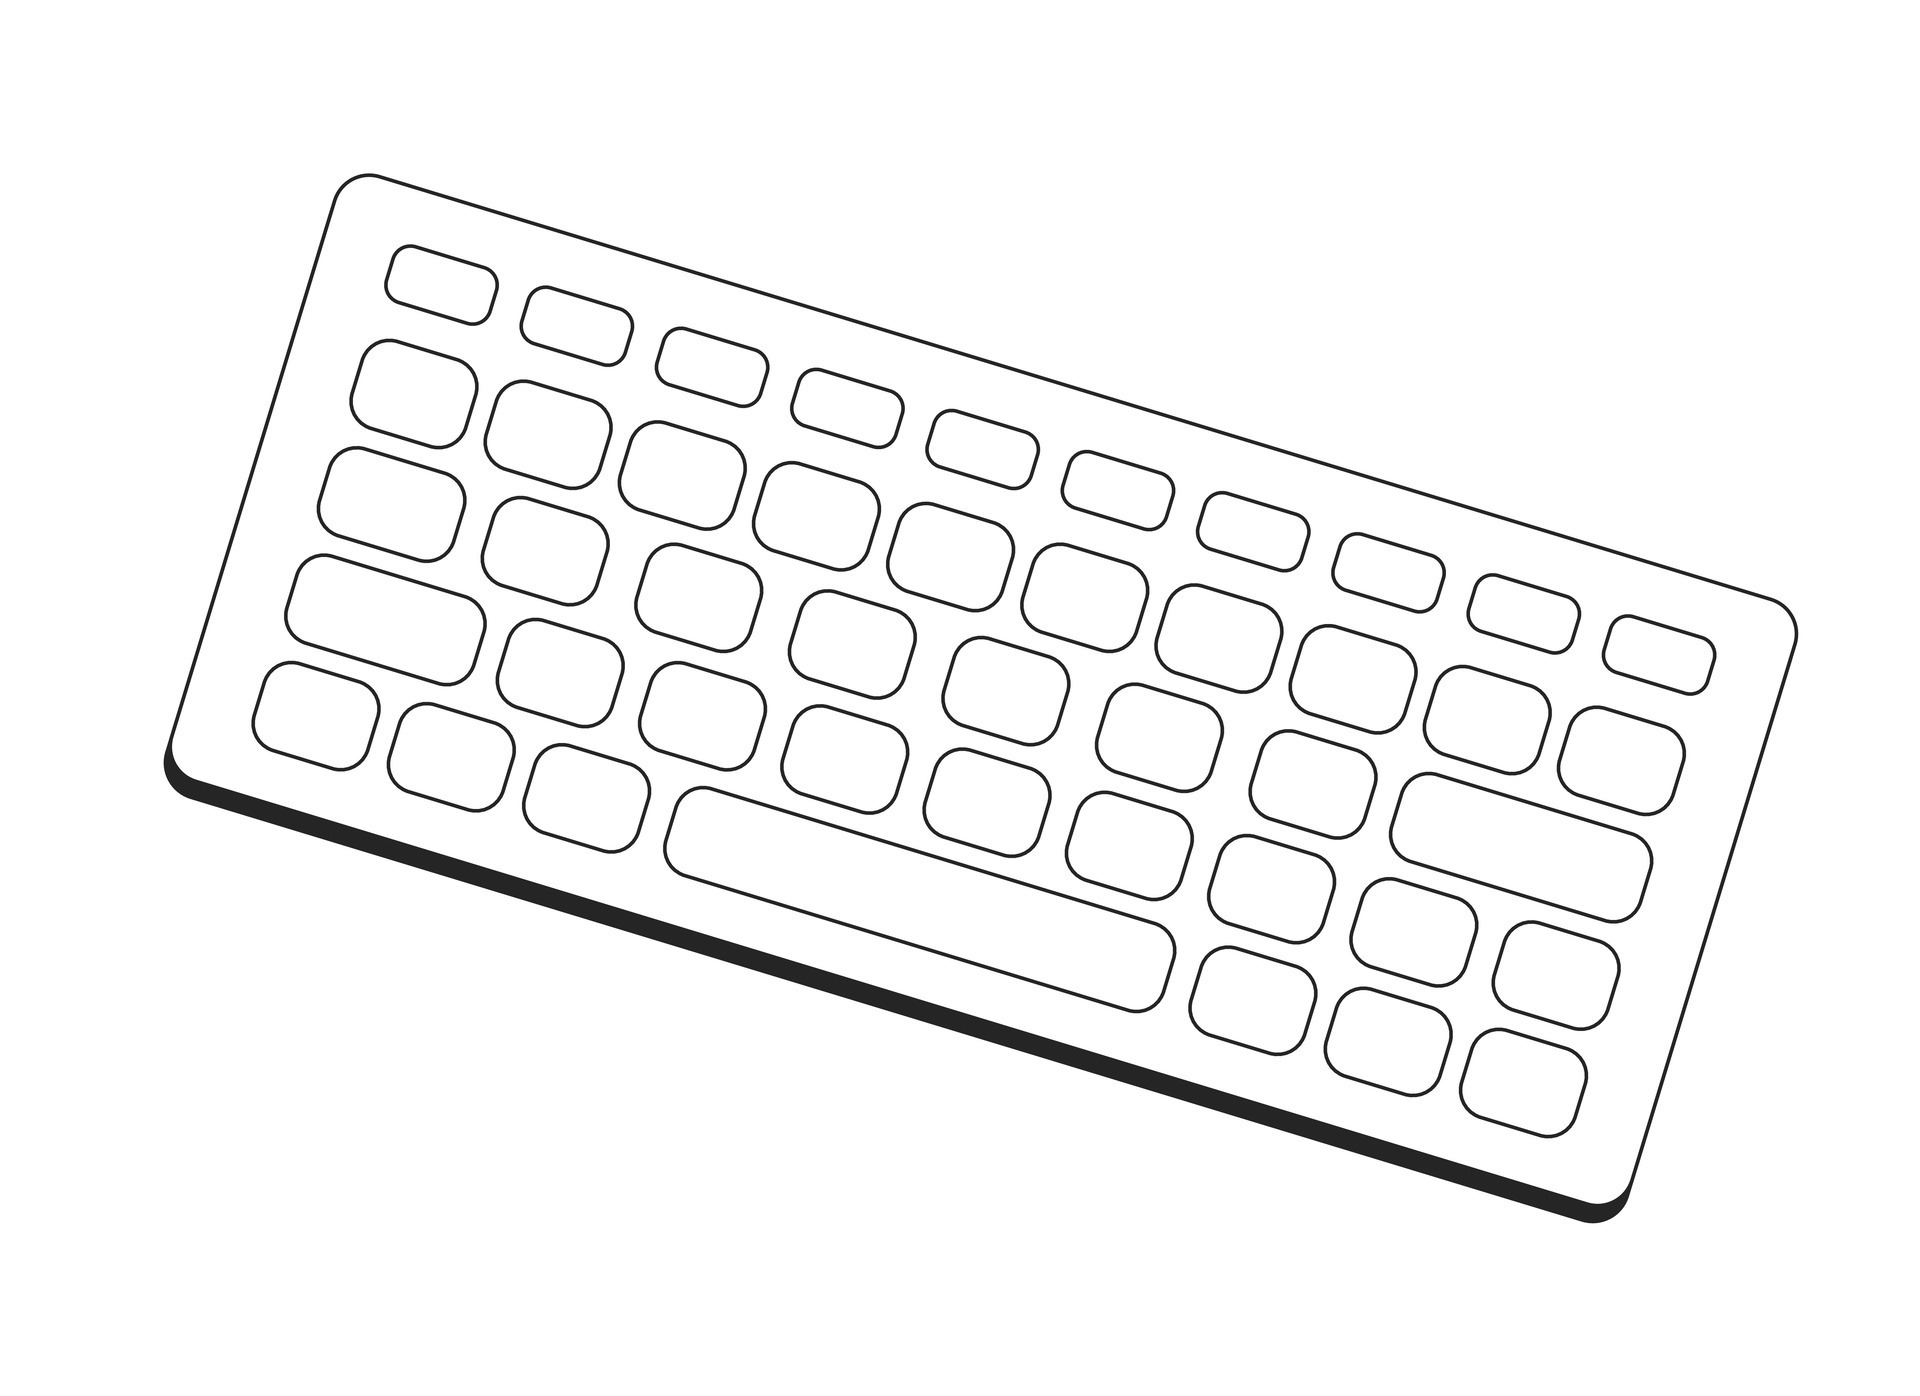 Drawing Computer Keyboard and Mouse (Primary 1) - ClassRoomNotes